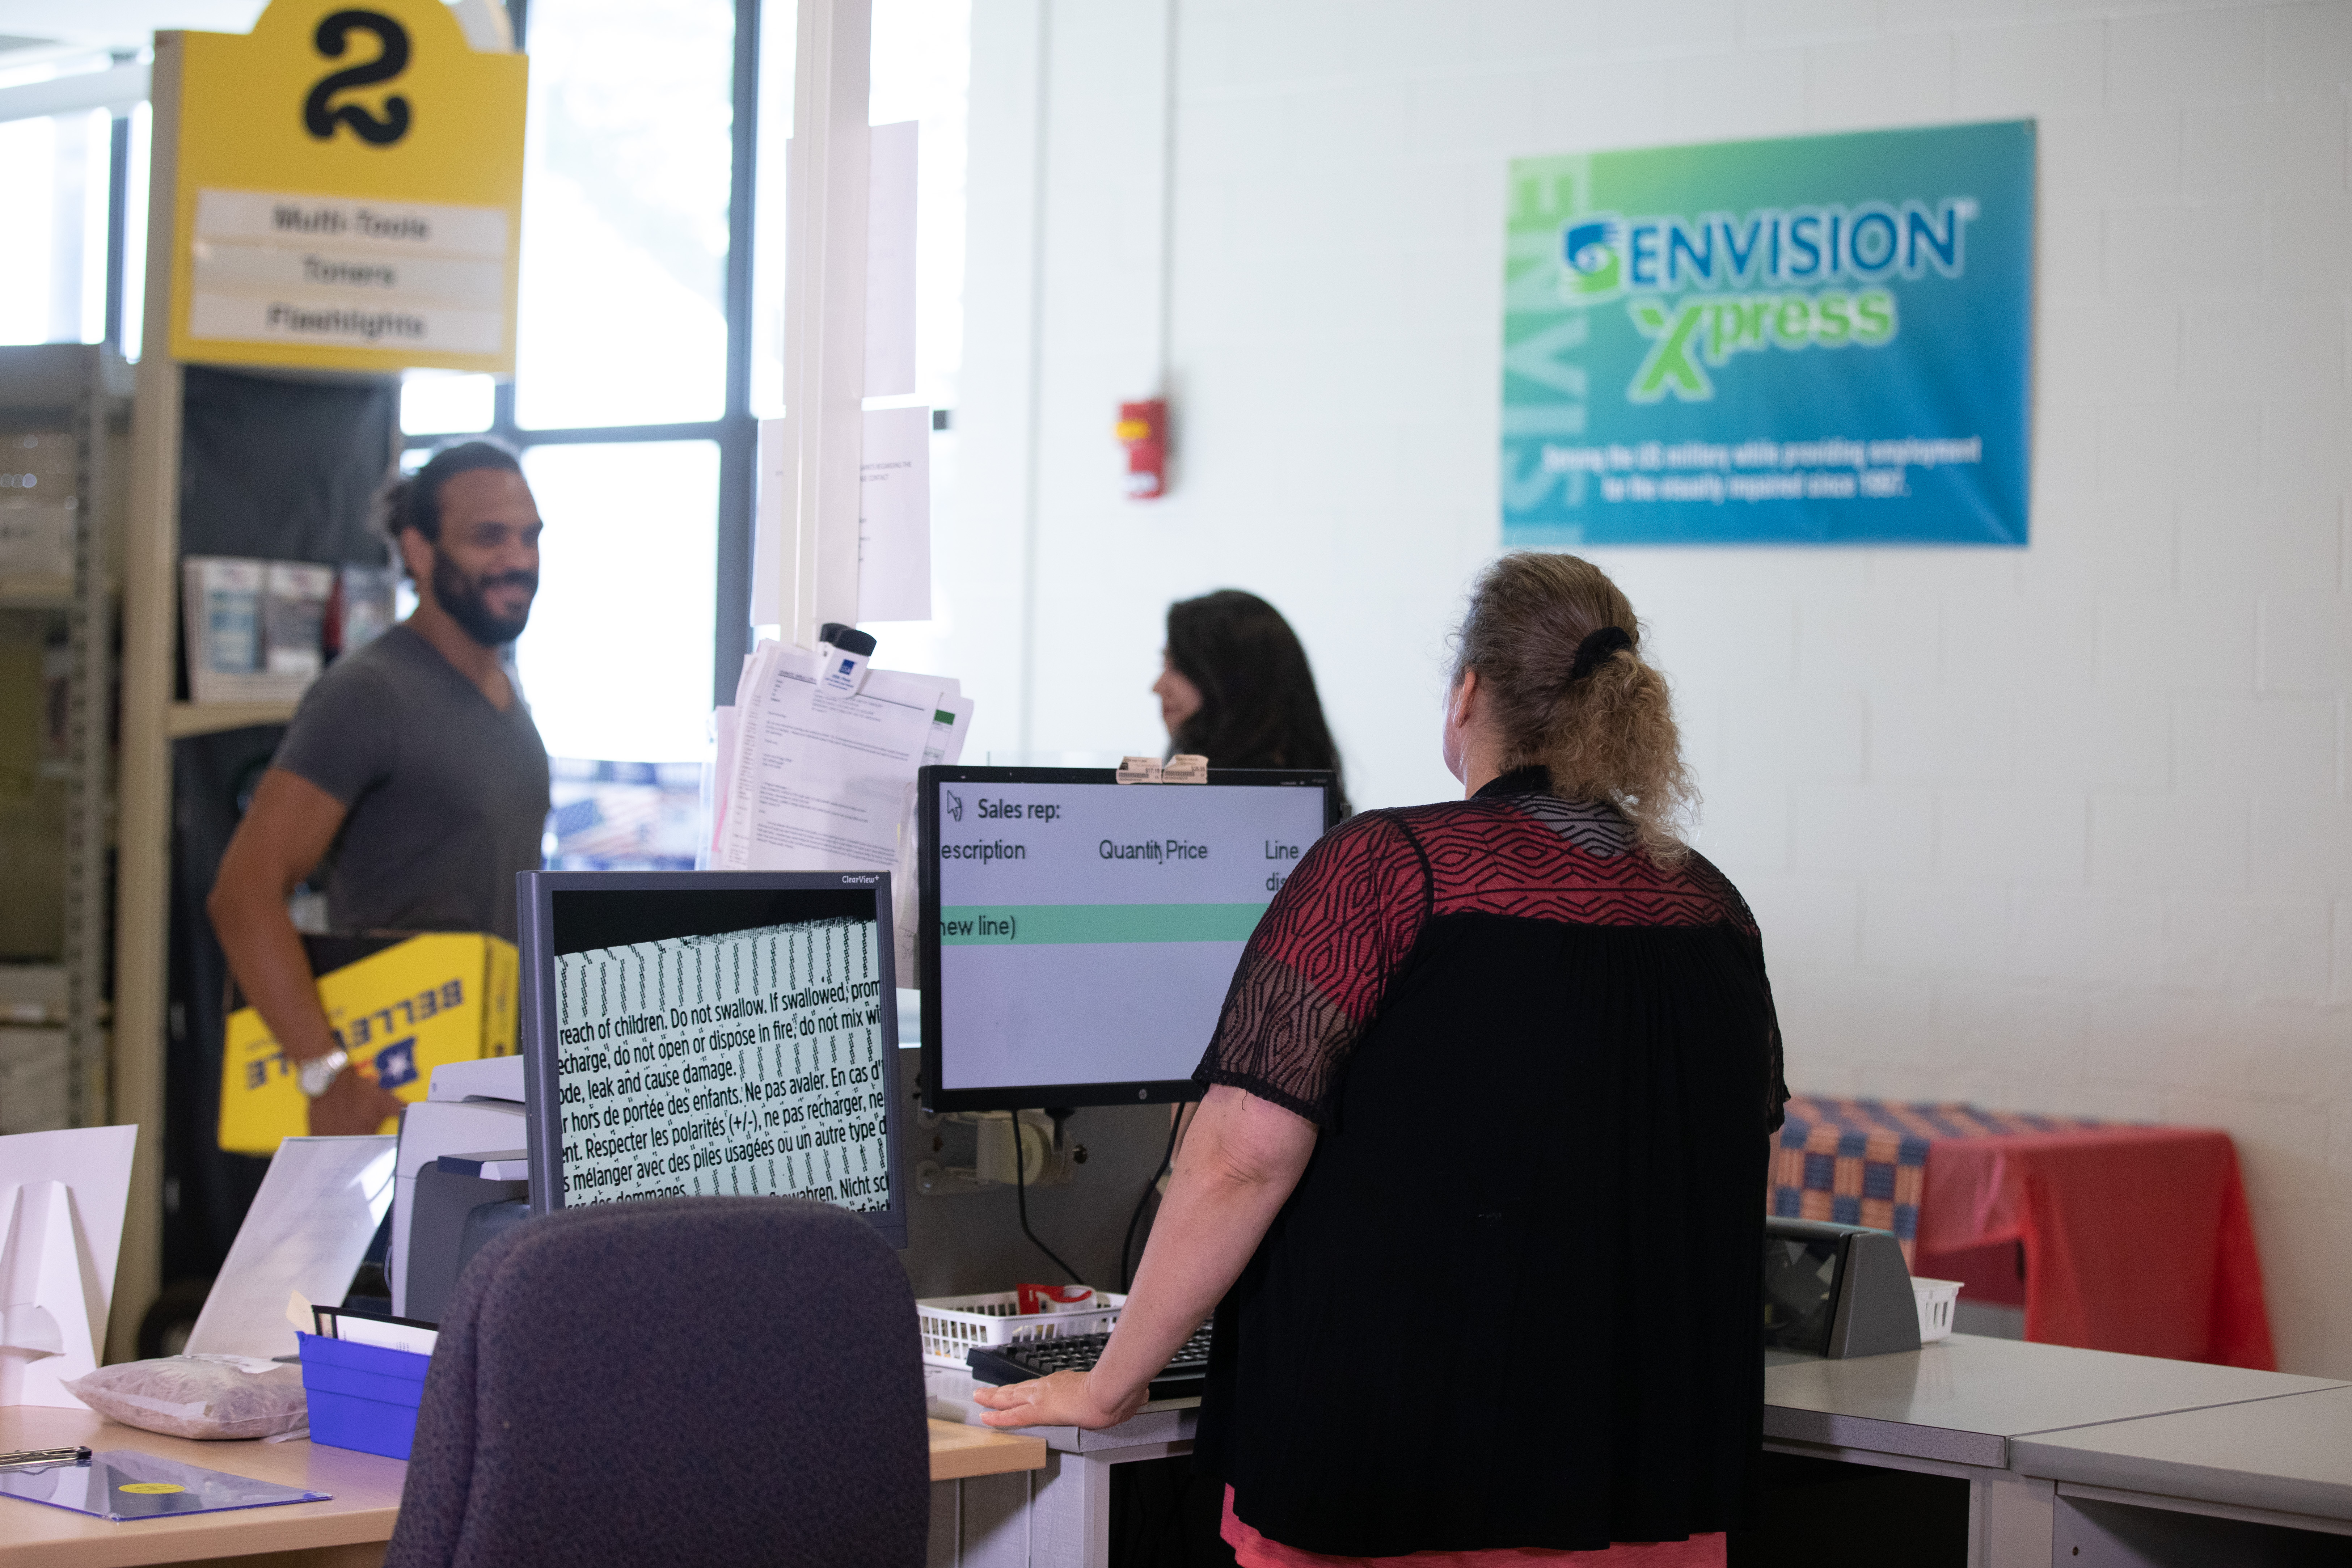 Envision Xpress sign on the wall, female cashier at computer helping male customer